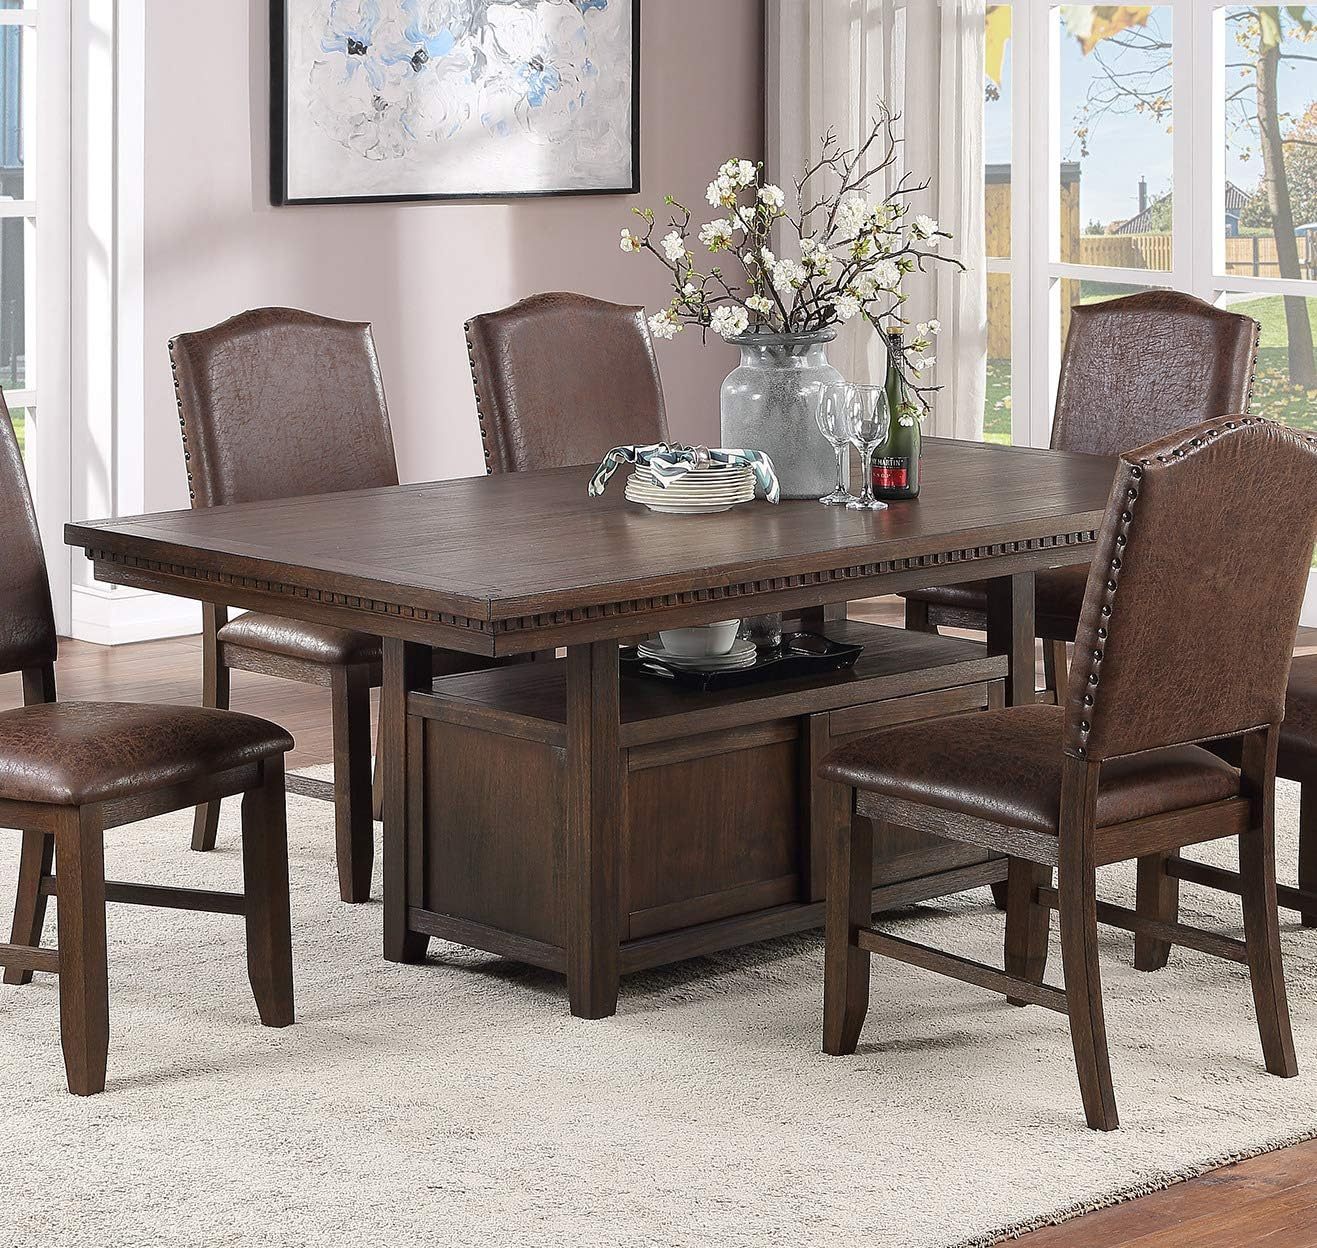 Dining Room Furniture Rustic Espresso Counter Height